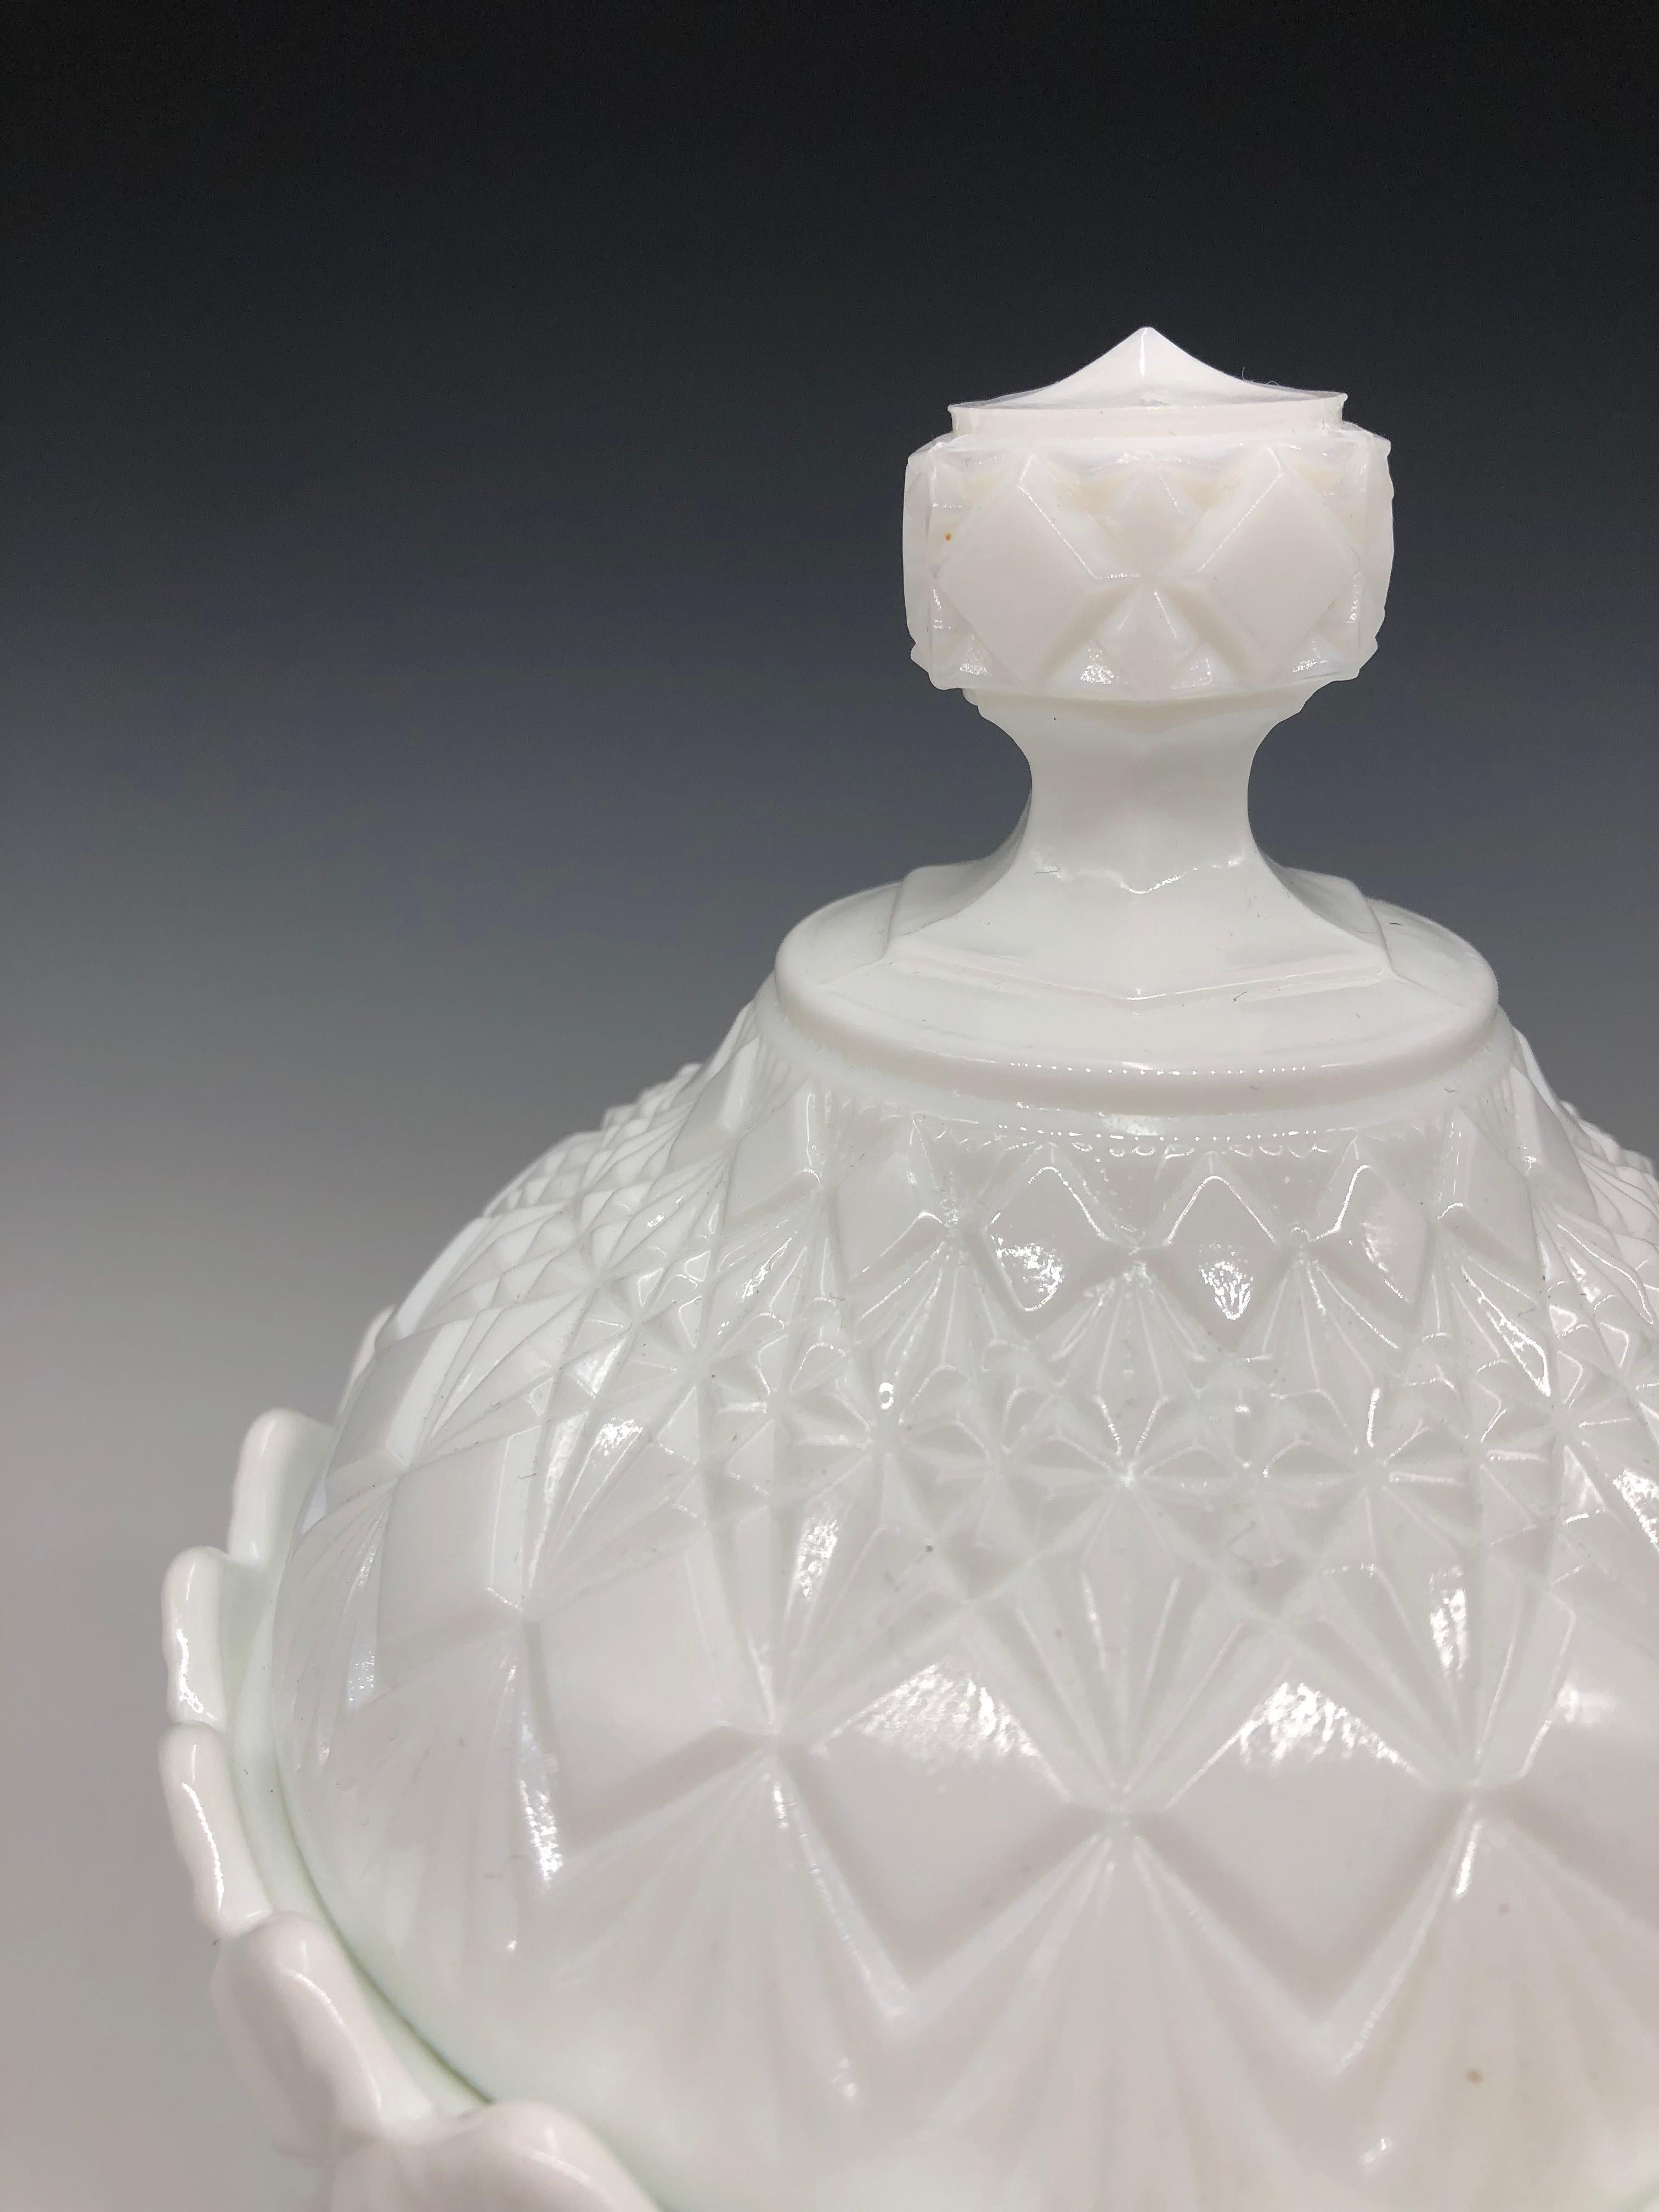 1960s White Fenton Olde Virginia Glass Pedestal Candy Dish with Lid In Excellent Condition For Sale In East Quogue, NY